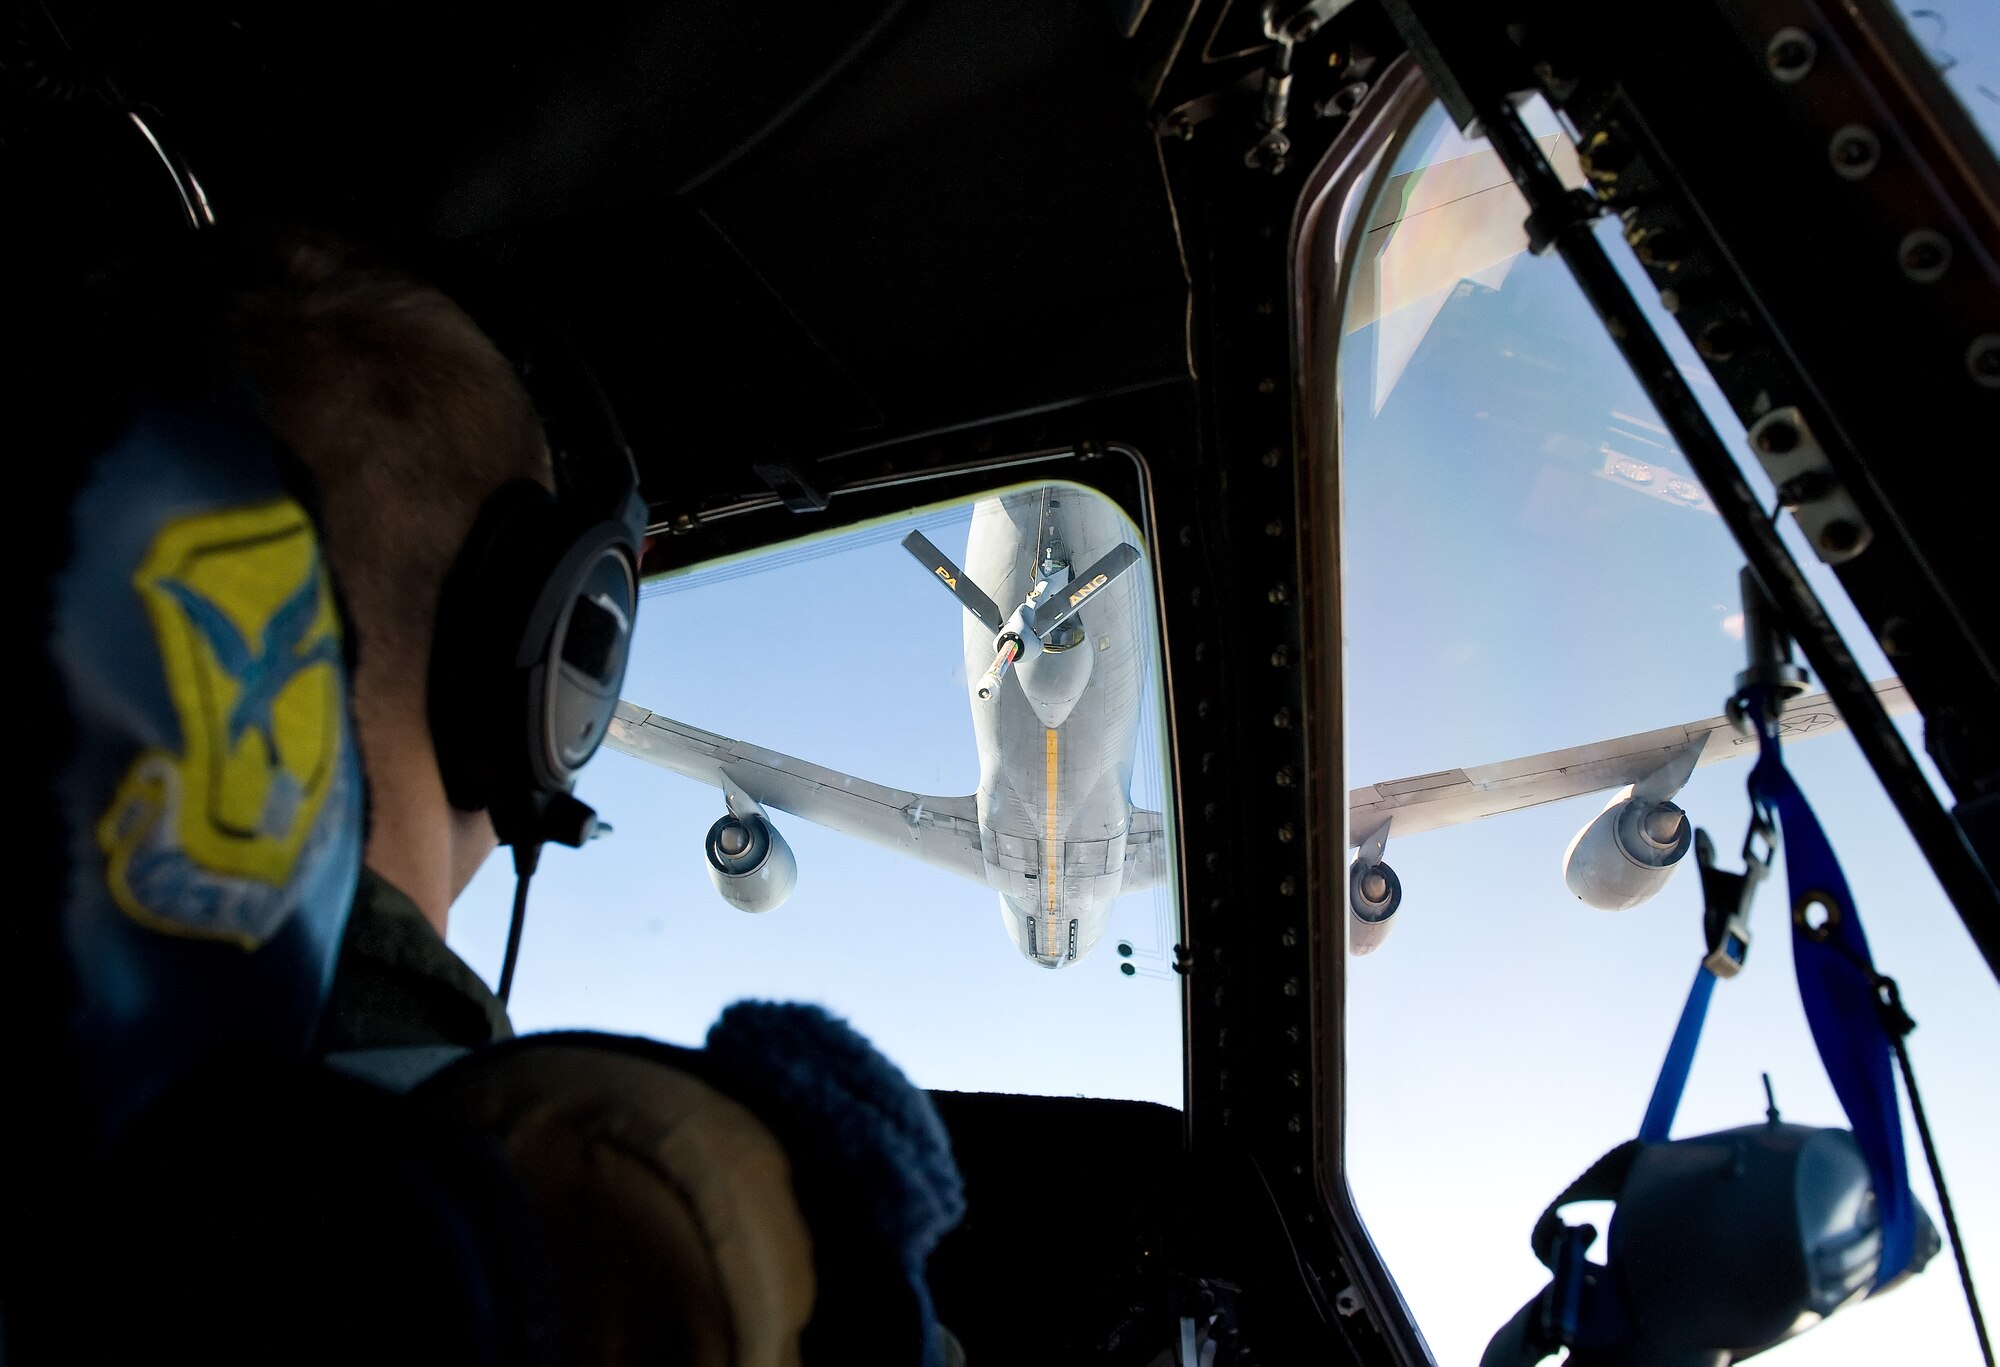 Capt. Neal Ballas, 9th Airlift Squadron pilot, Dover Air Force Base, Del., keeps an eye on a KC-135T Stratotanker while he helps position a C-5M Super Galaxy up to the refueler during an air refueling training flight Oct. 29, 2014,. Two Pennsylvania Air National Guard KC-135T Stratotankers from the 171st Air Refueling Wing, Pittsburgh International Airport, Pa. transferred 1,000 pounds of fuel each to the C-5M. (U.S. Air Force photo/Roland Balik)